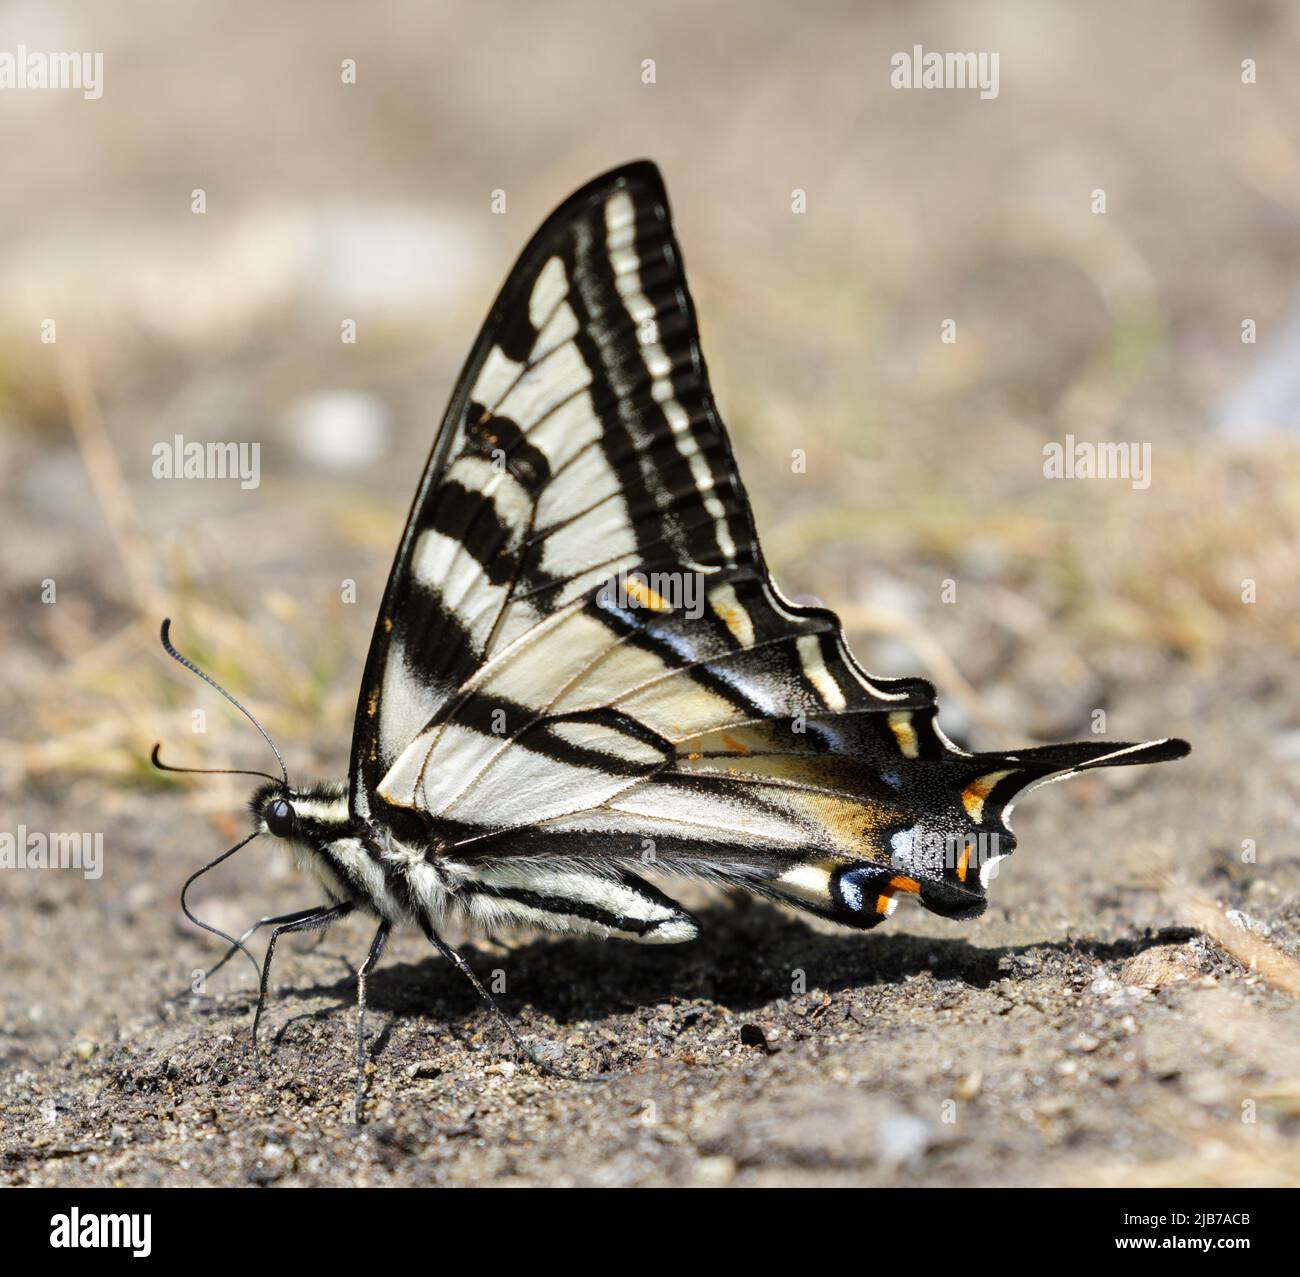 Pale Swallowtail Perched on the Ground. Foothills Park, Santa Clara County, California, USA. Stock Photo